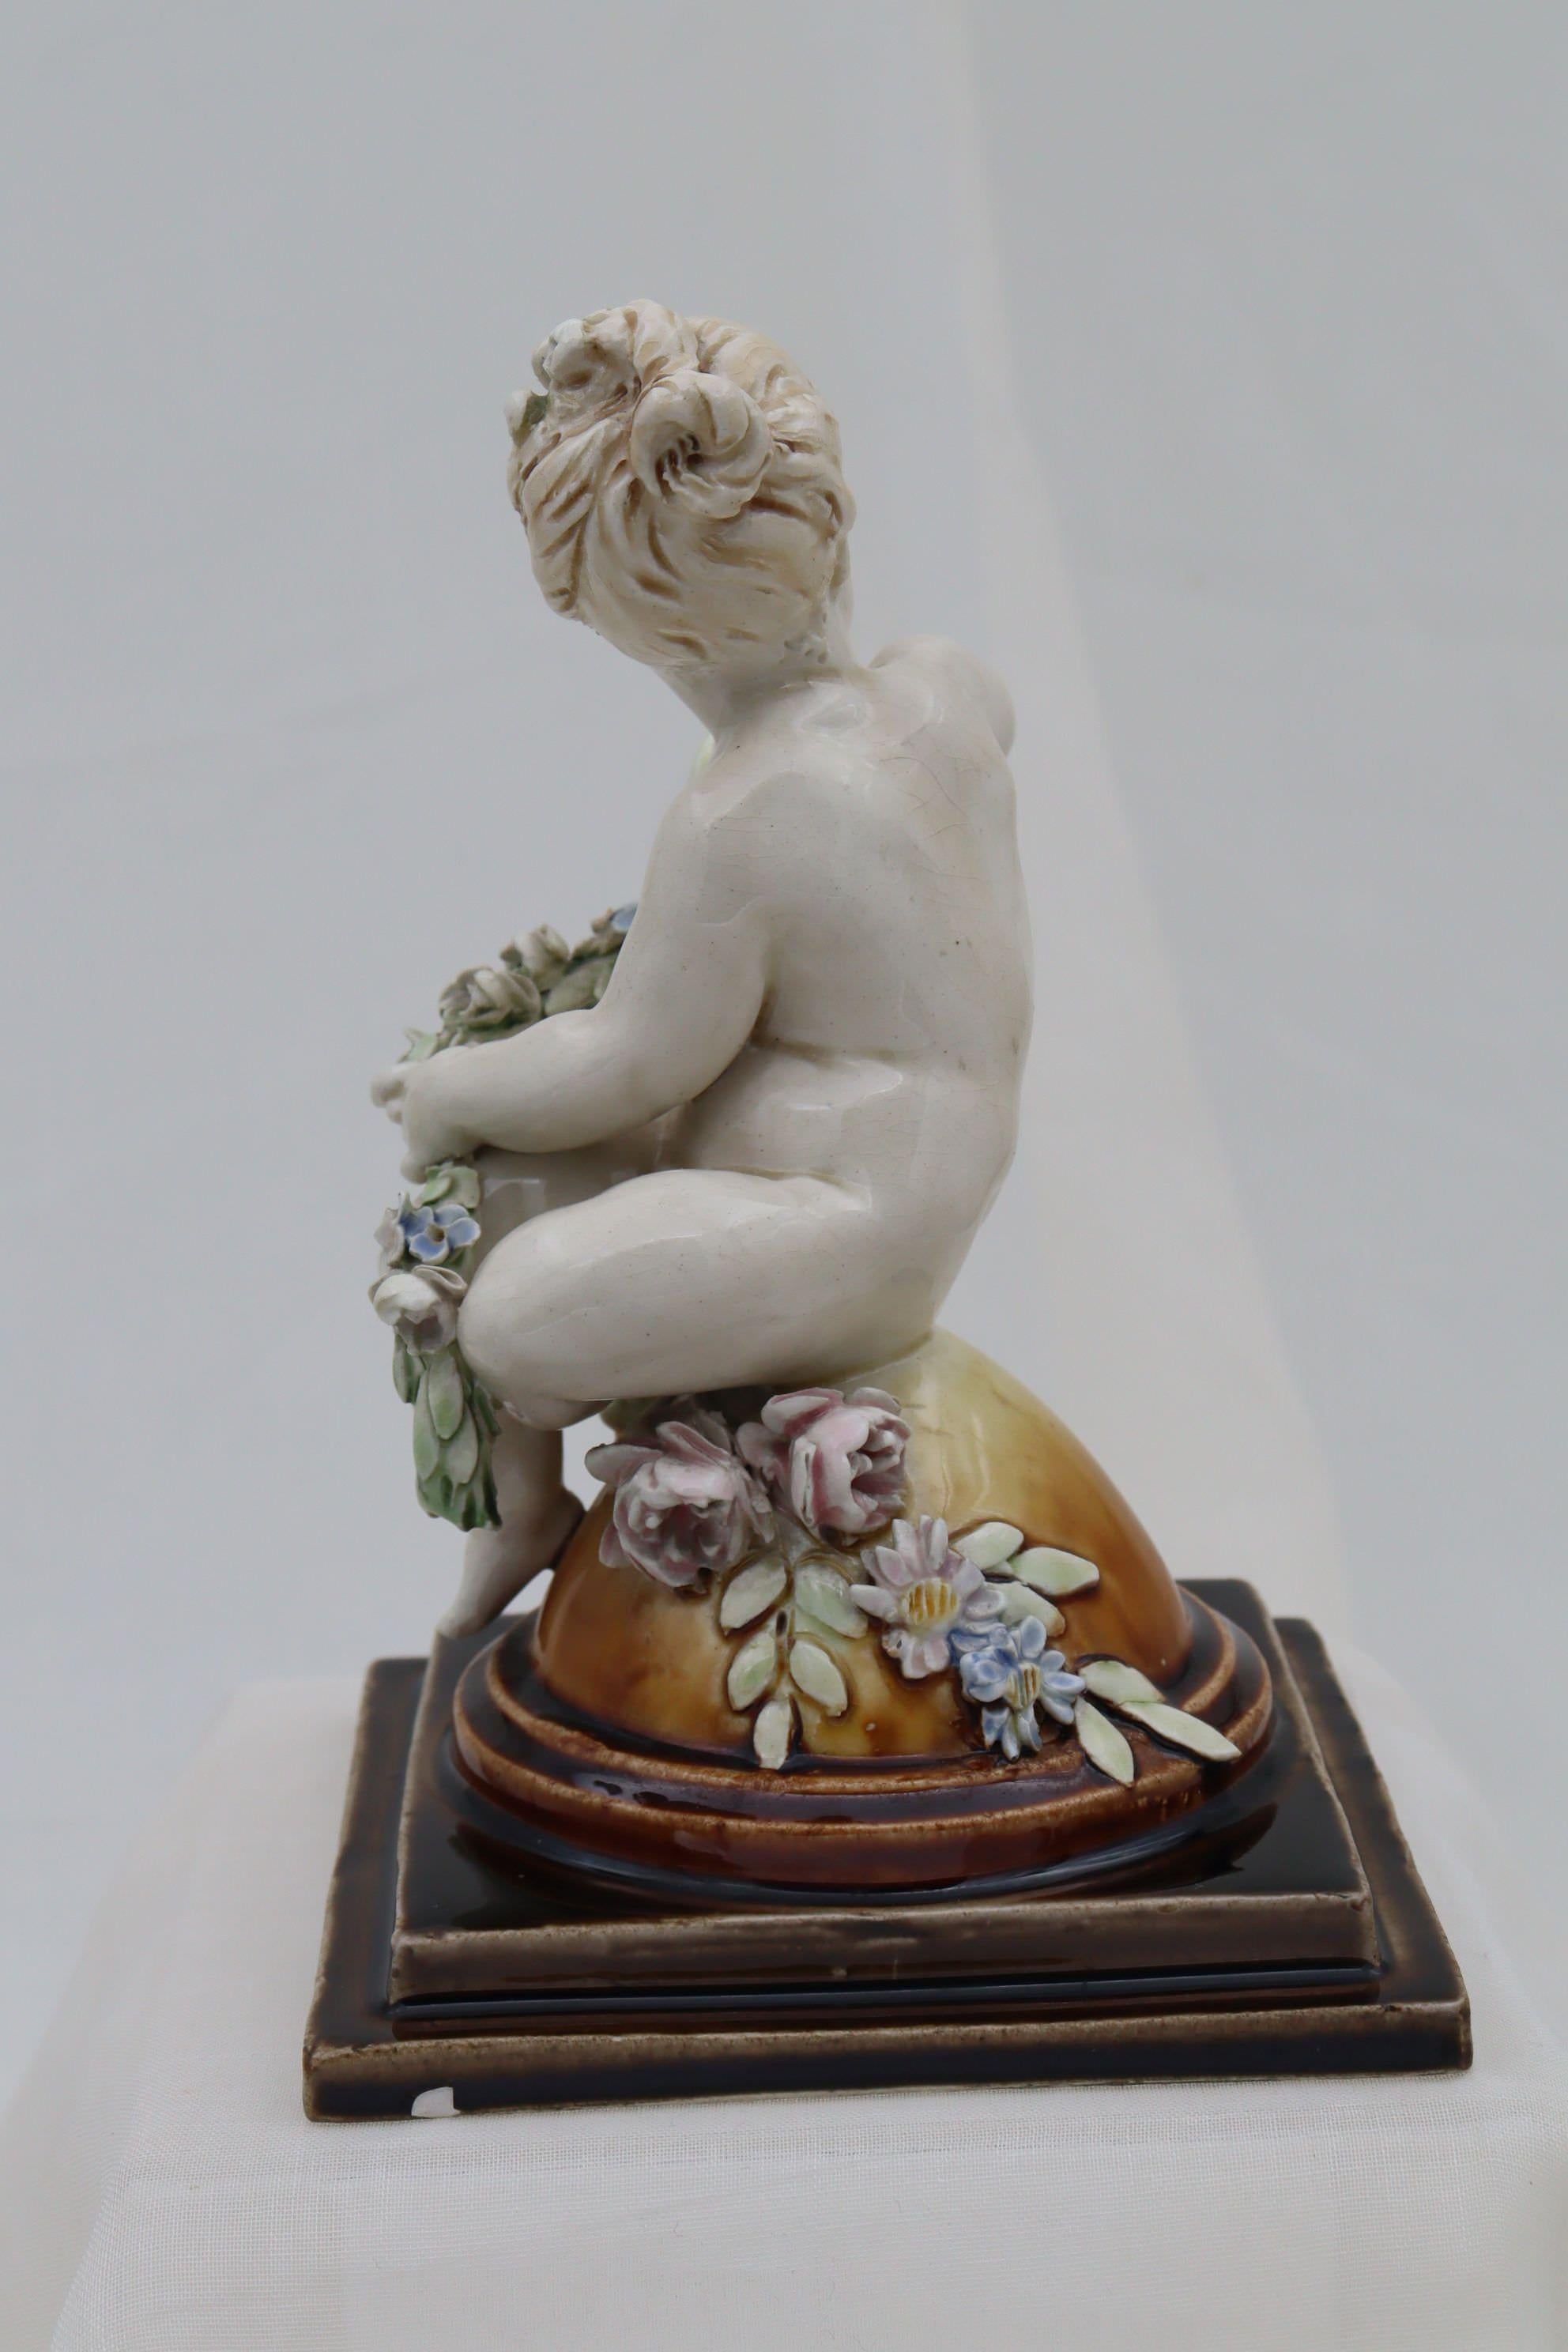 Cherub figurine by Louis Carrier-Belleuse In Good Condition For Sale In East Geelong, VIC